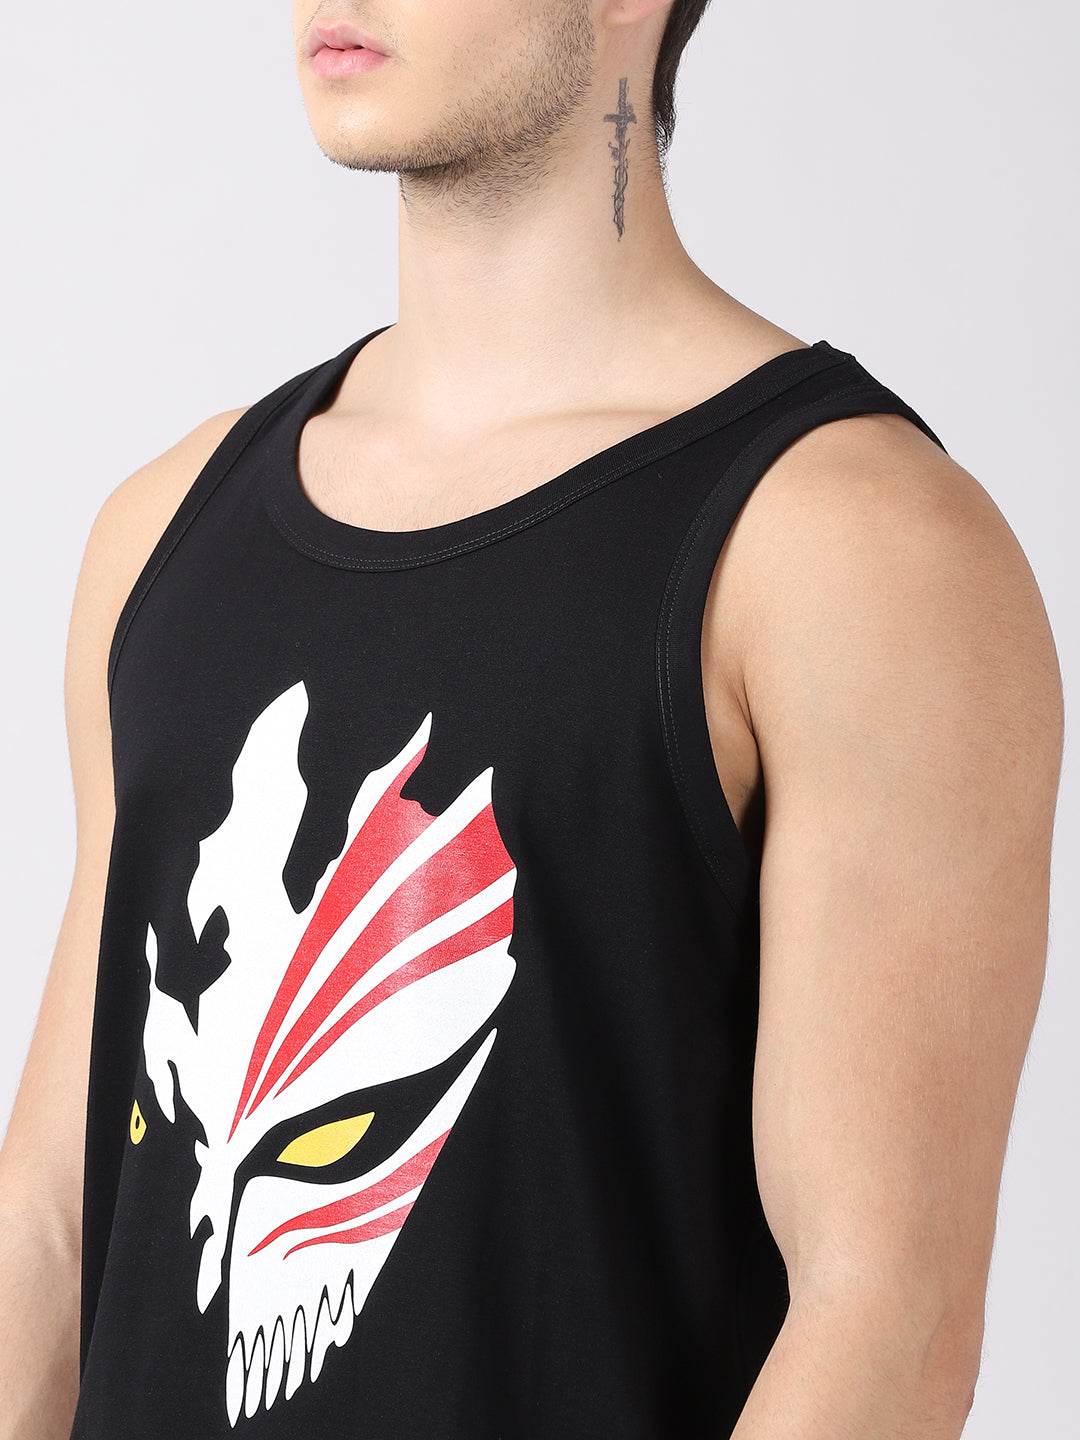 Buy Fans Army Soft Comfortable One Punch Man Anime Tank Top VestWhite and  RedSmall at Amazonin